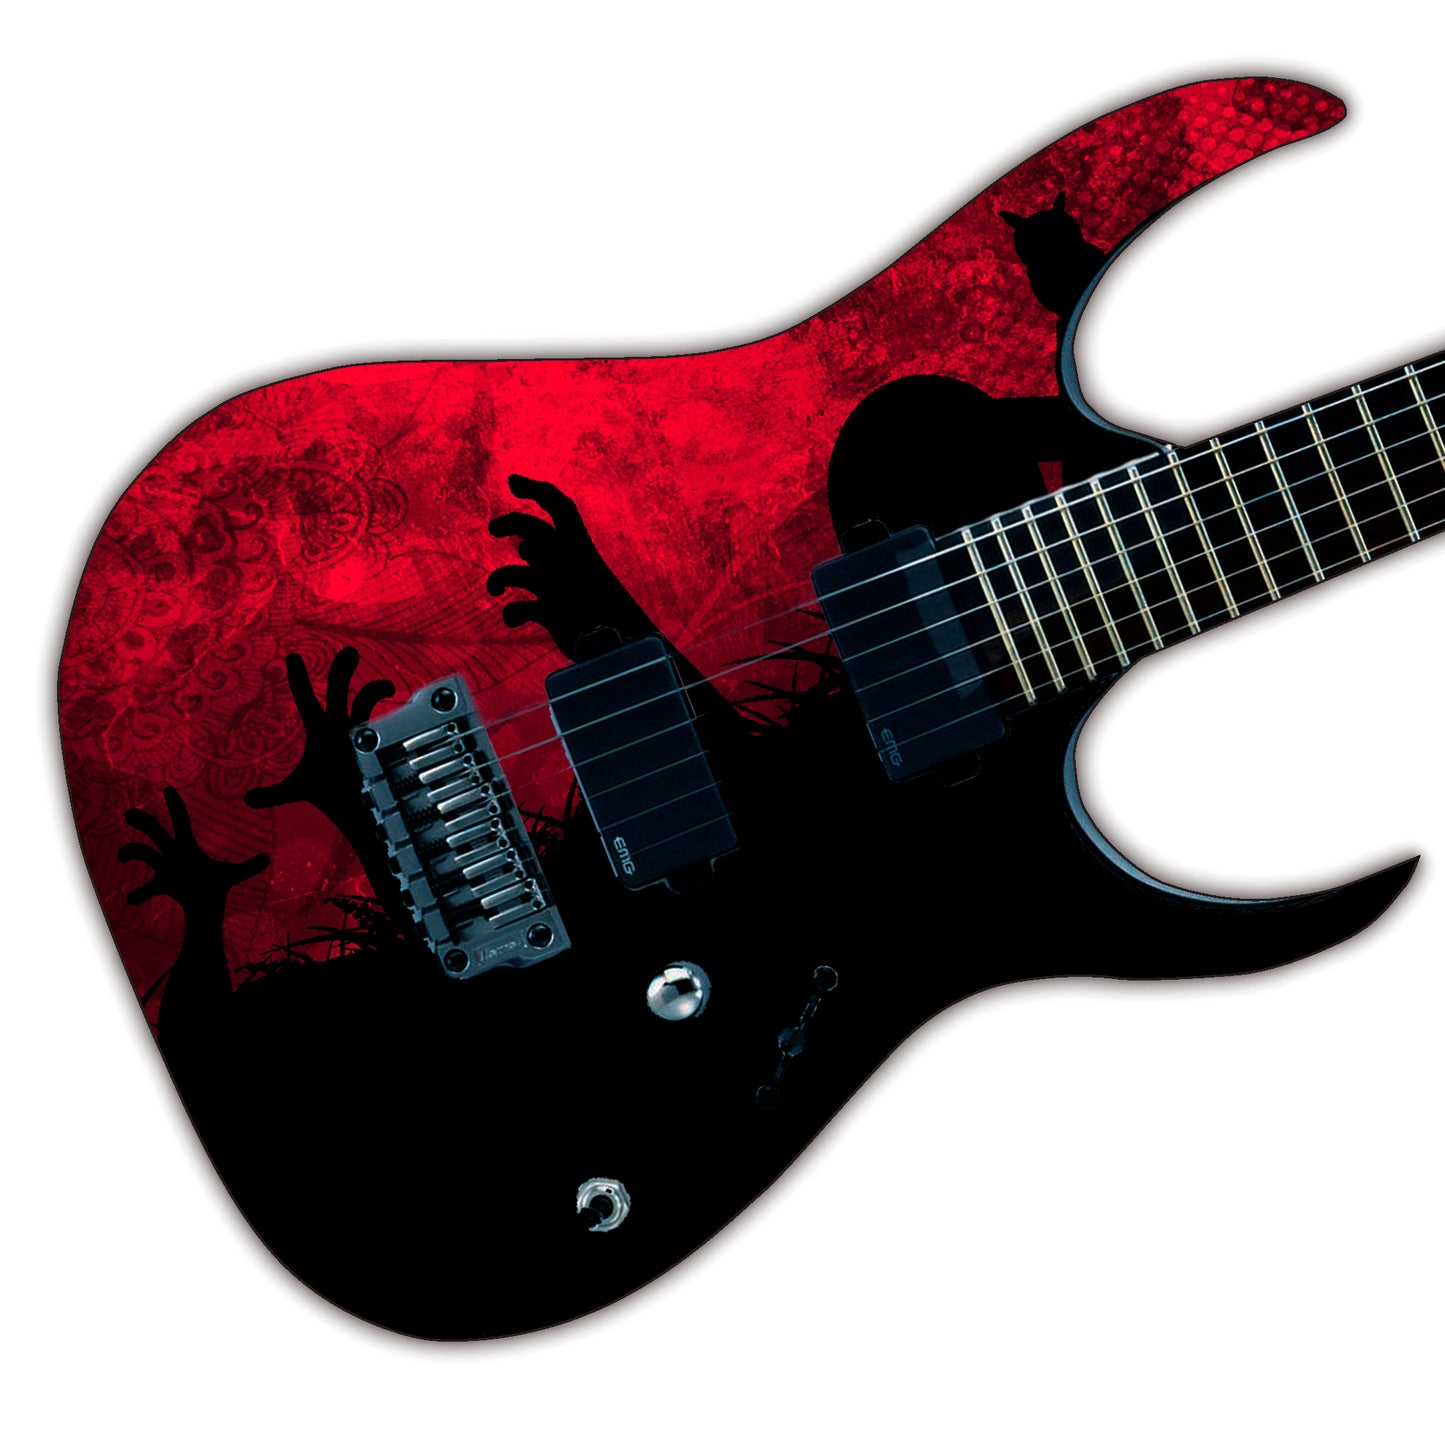 Guitar, Bass or Acoustic Skin Wrap Laminated Vinyl Decal Sticker The UnDead GS73